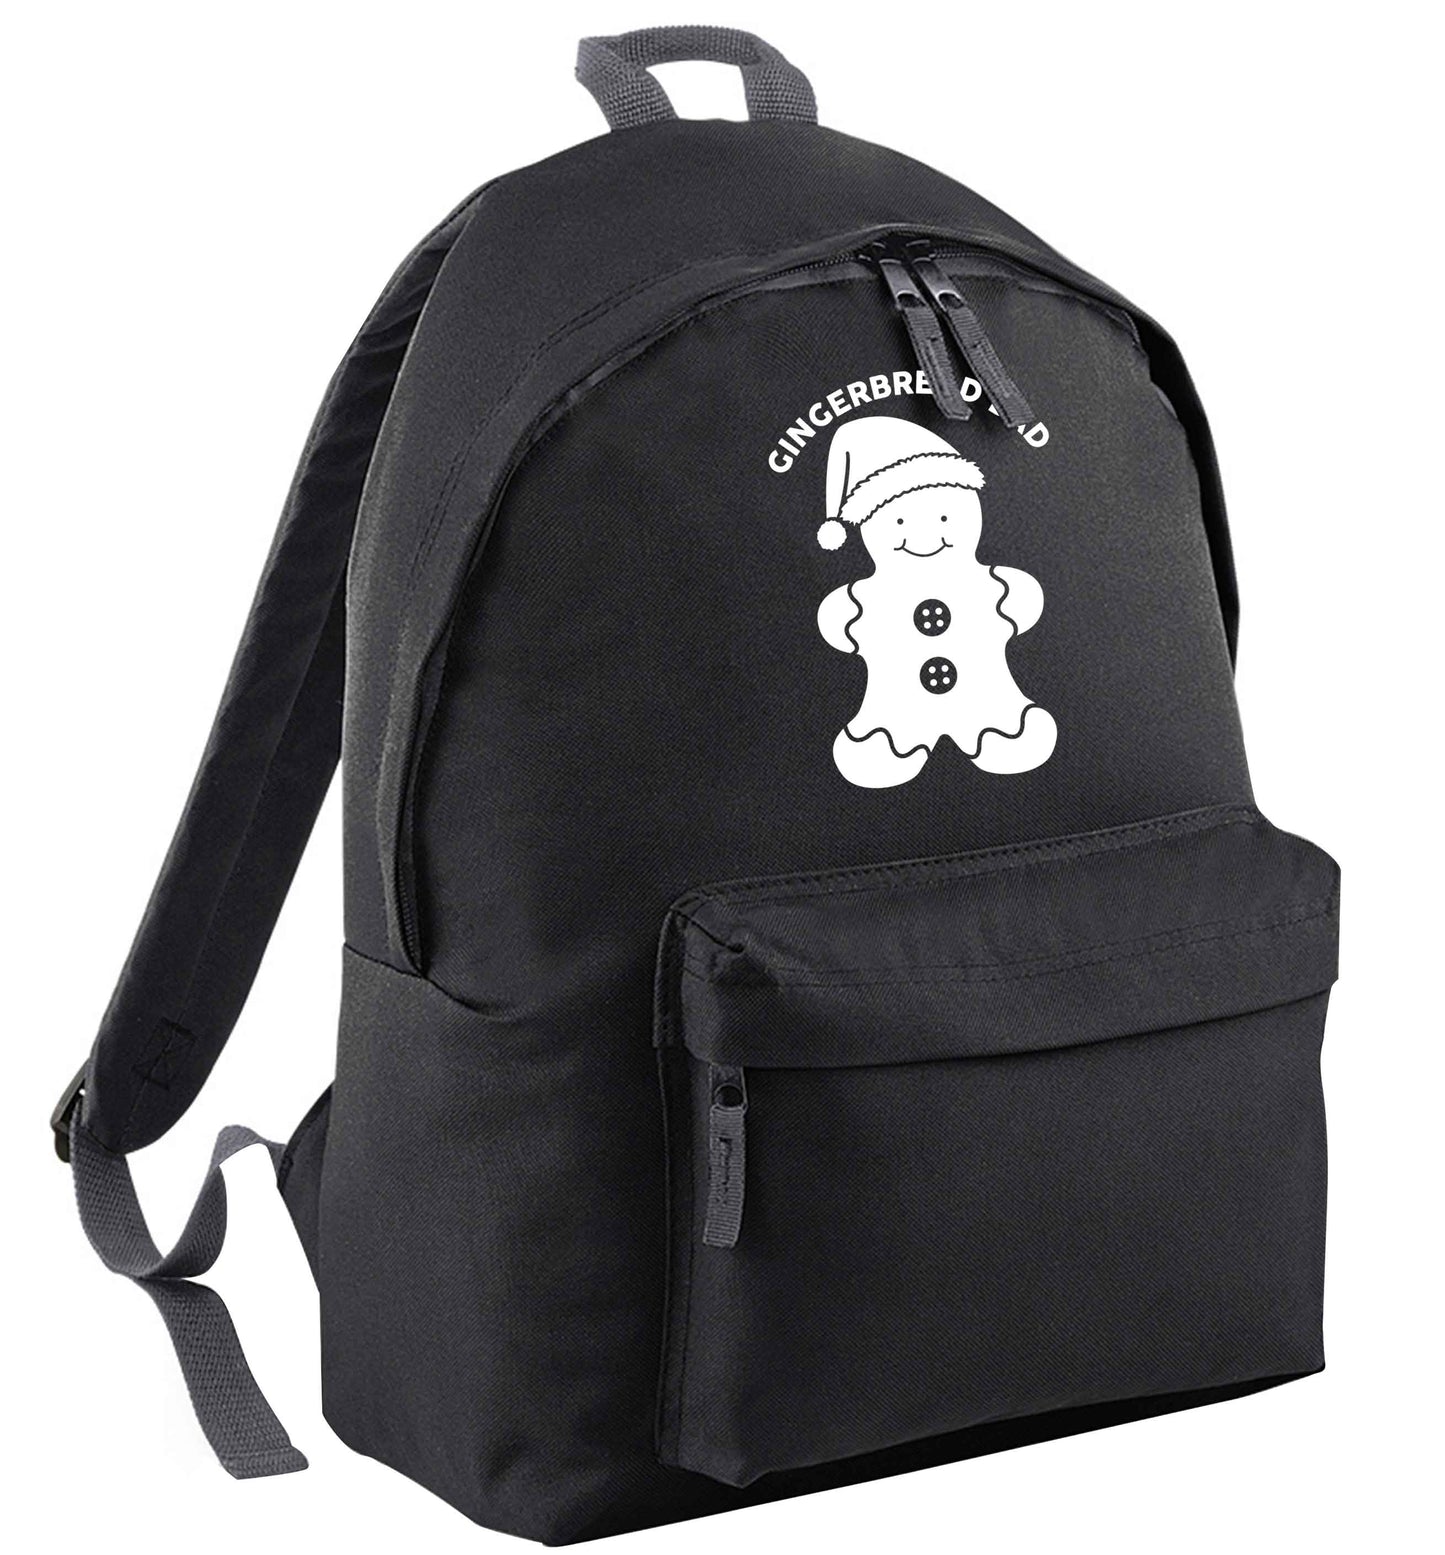 Merry Christmas black adults backpack